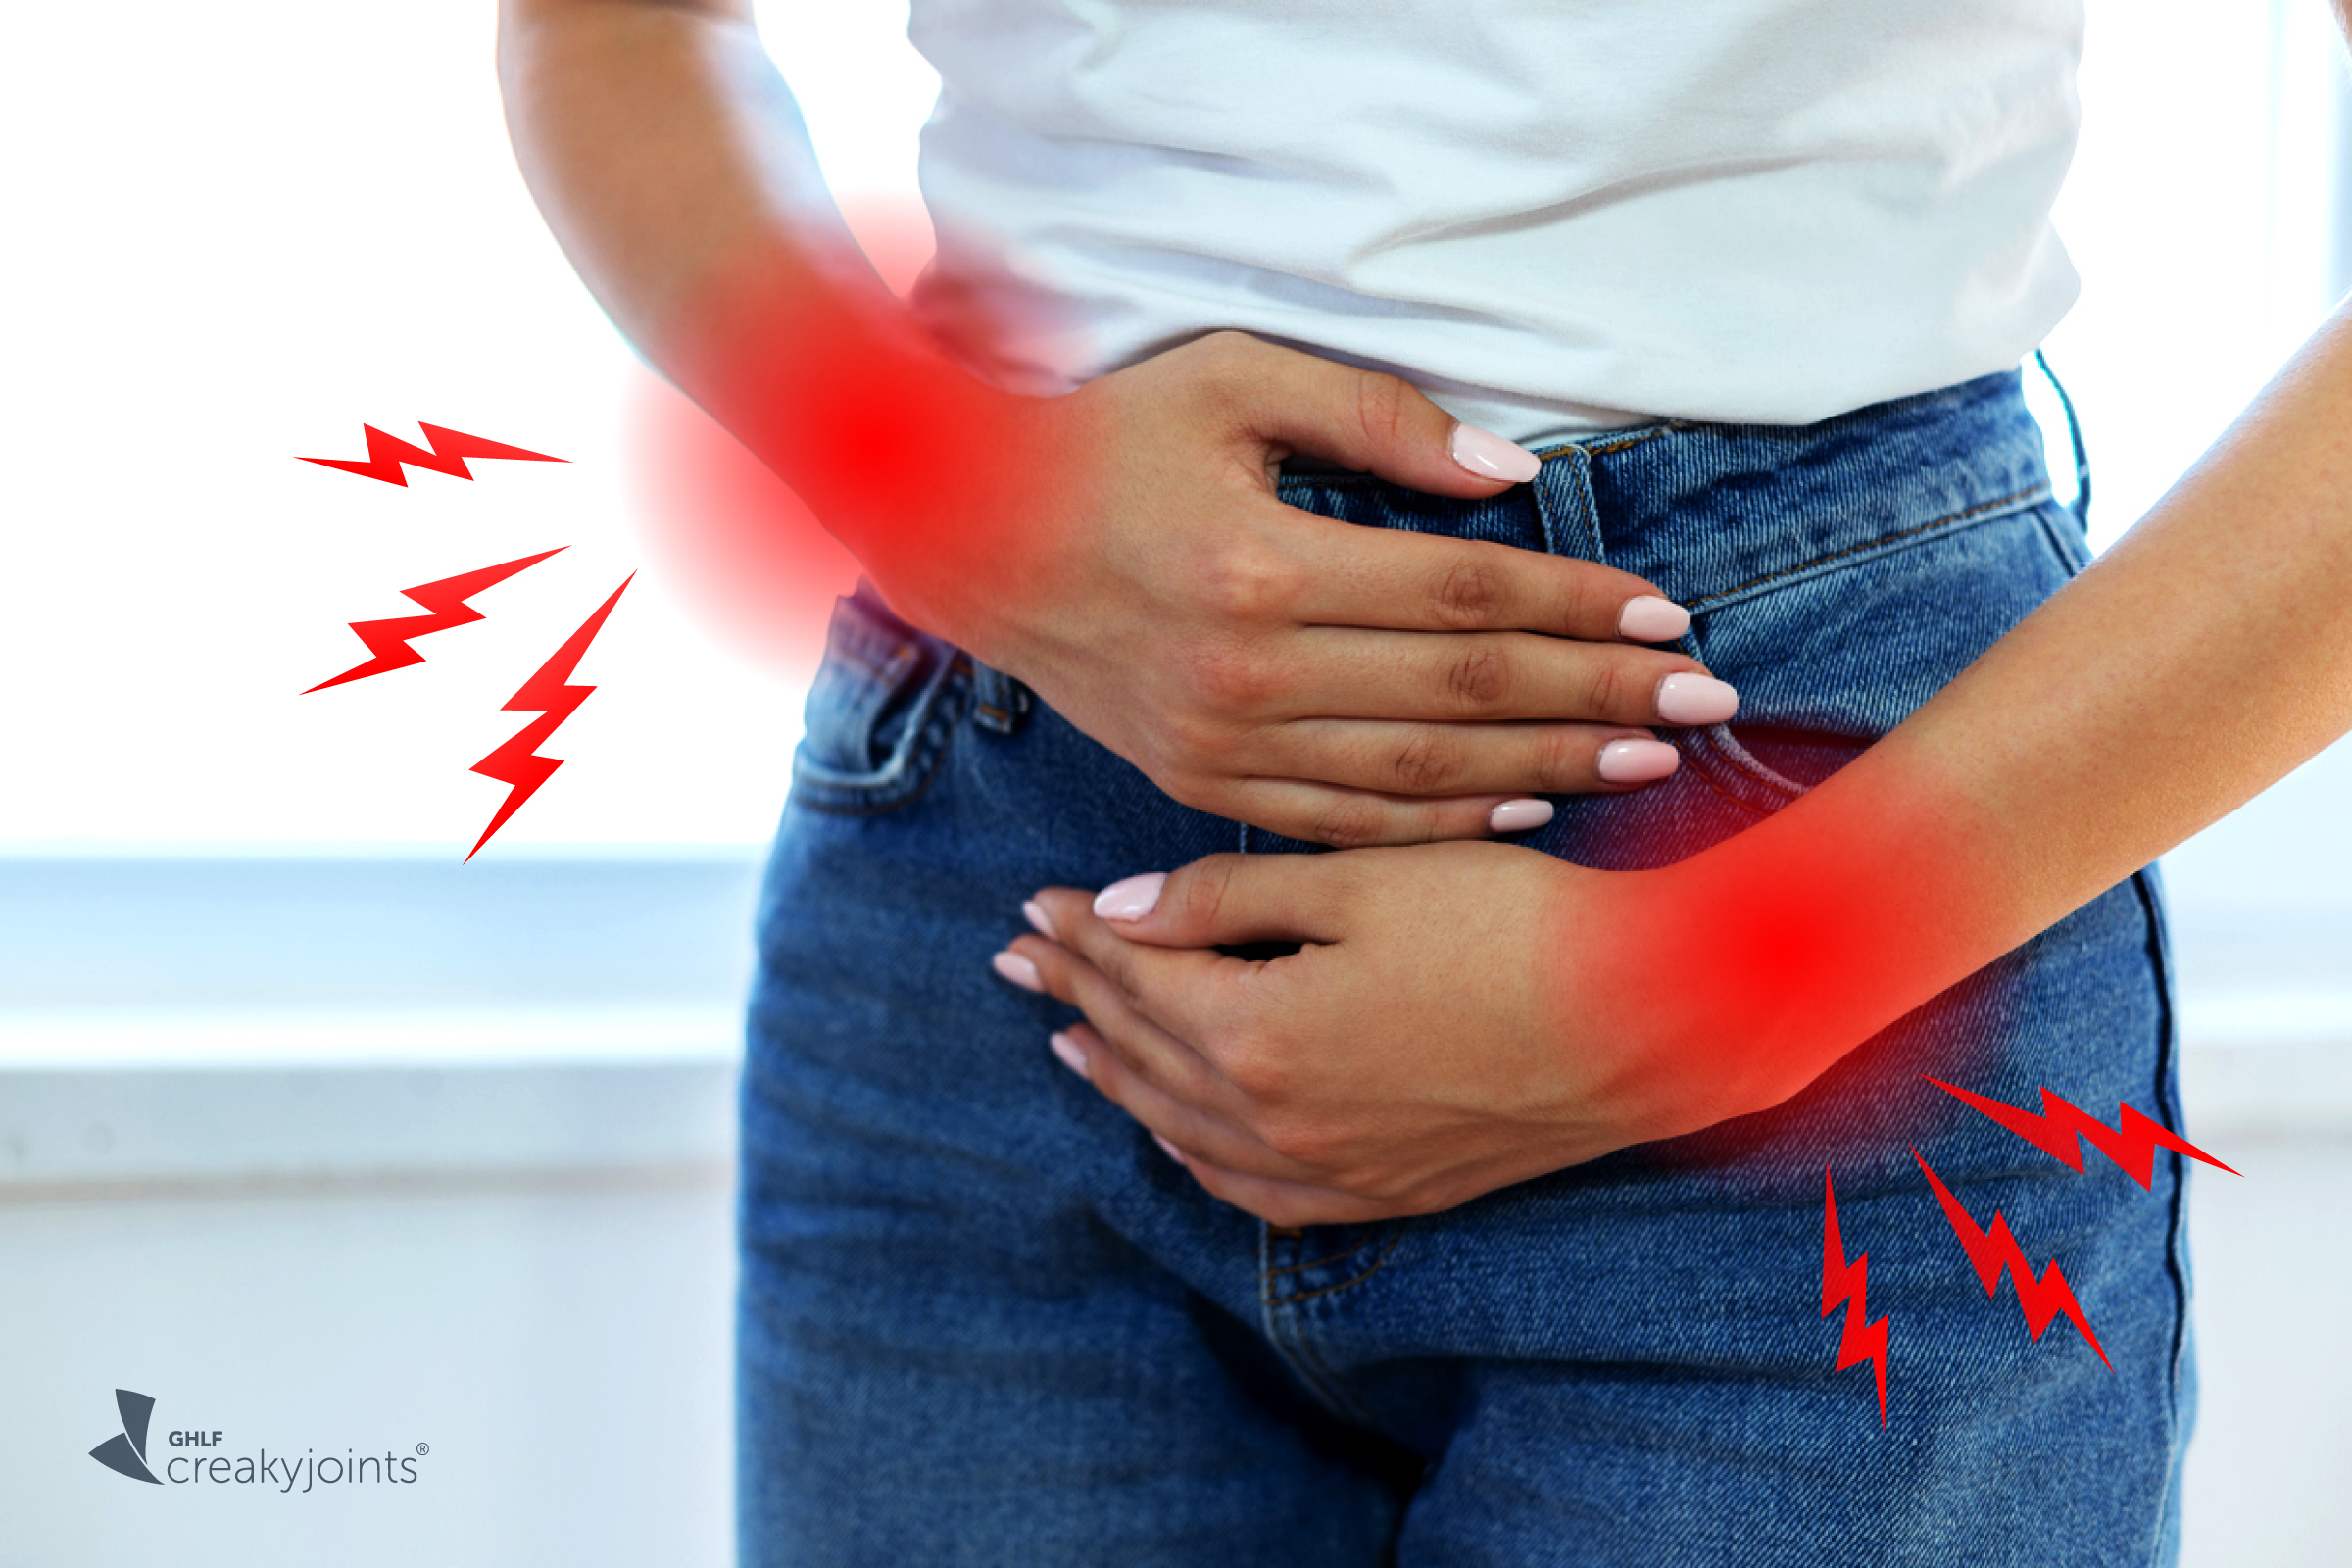 Your Period, Menstrual Cycle, and Arthritis Flares: What's the Connection?